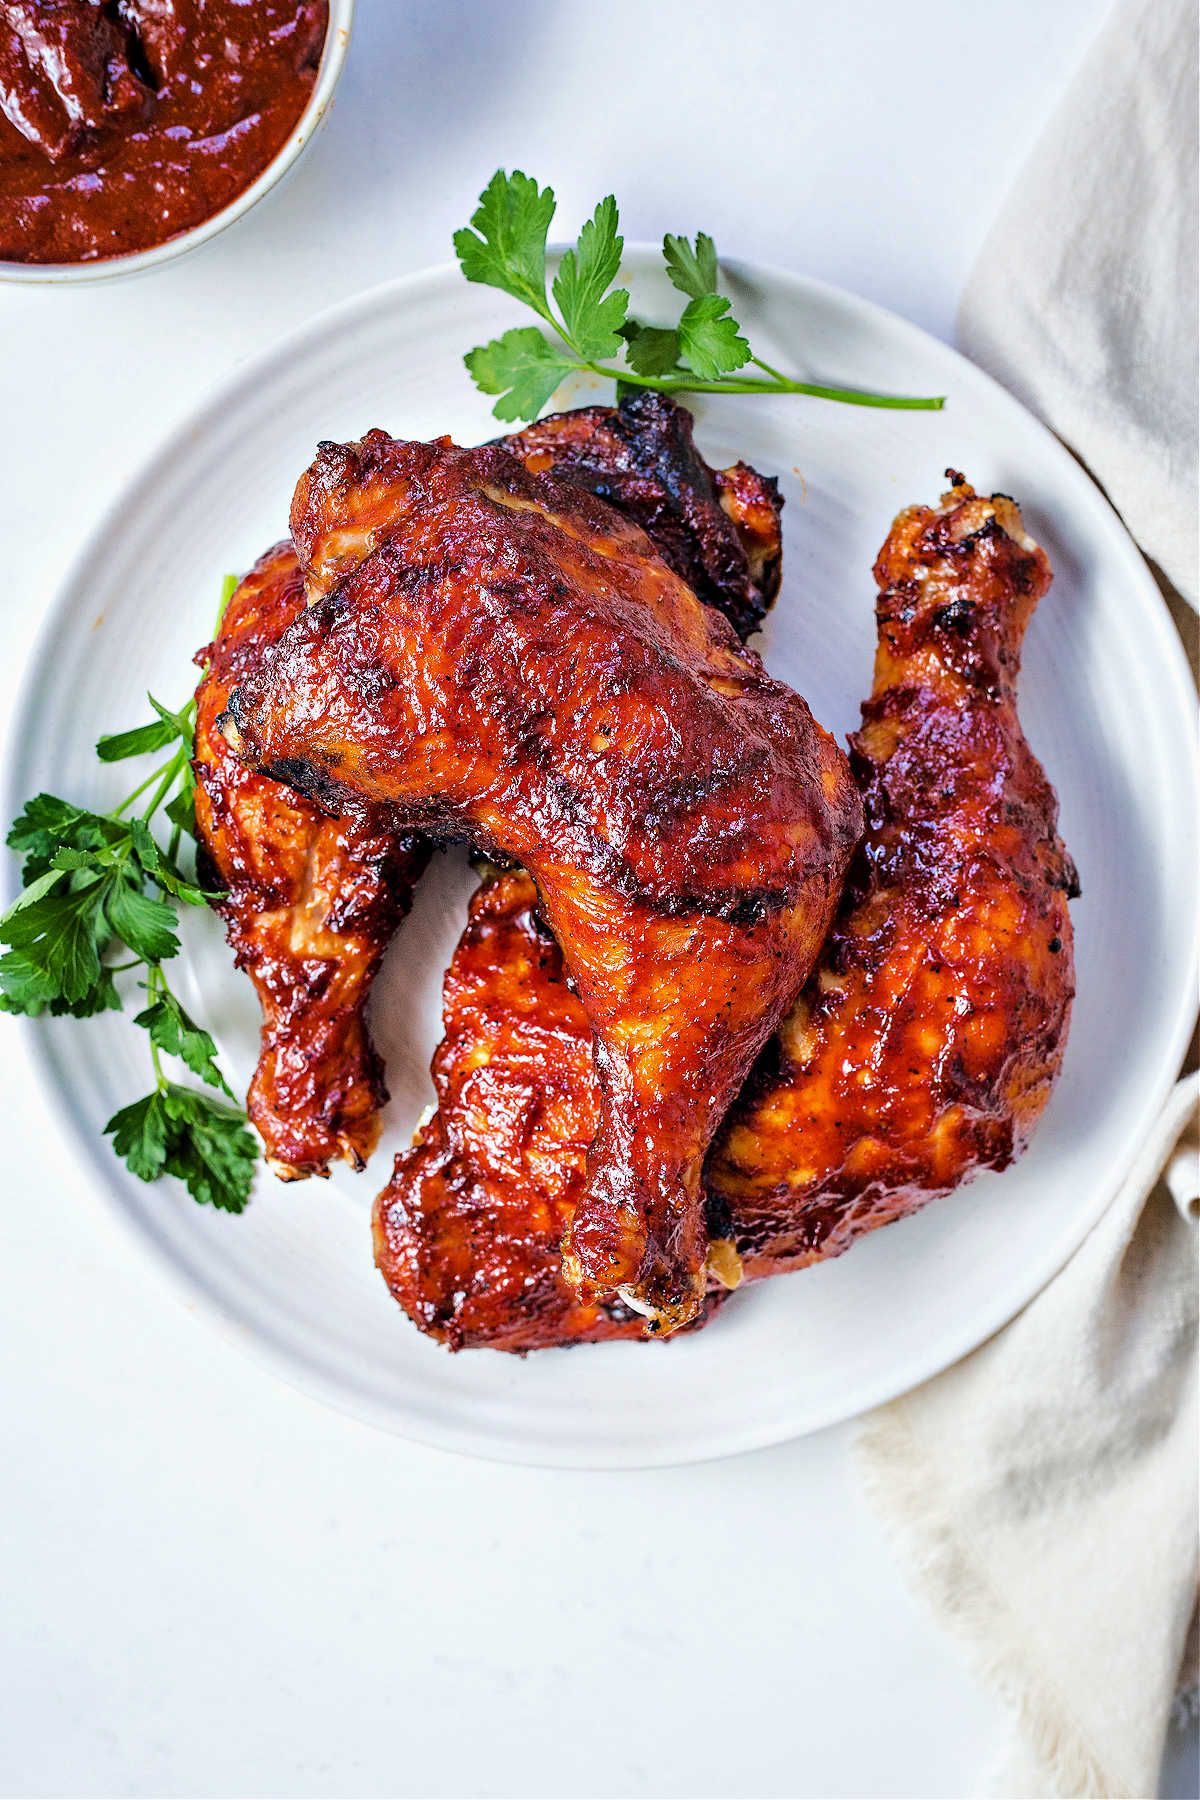 oven barbecue chicken leg quarters on a plate garnished with parsley with a bowl of barbecue sauce in the background.